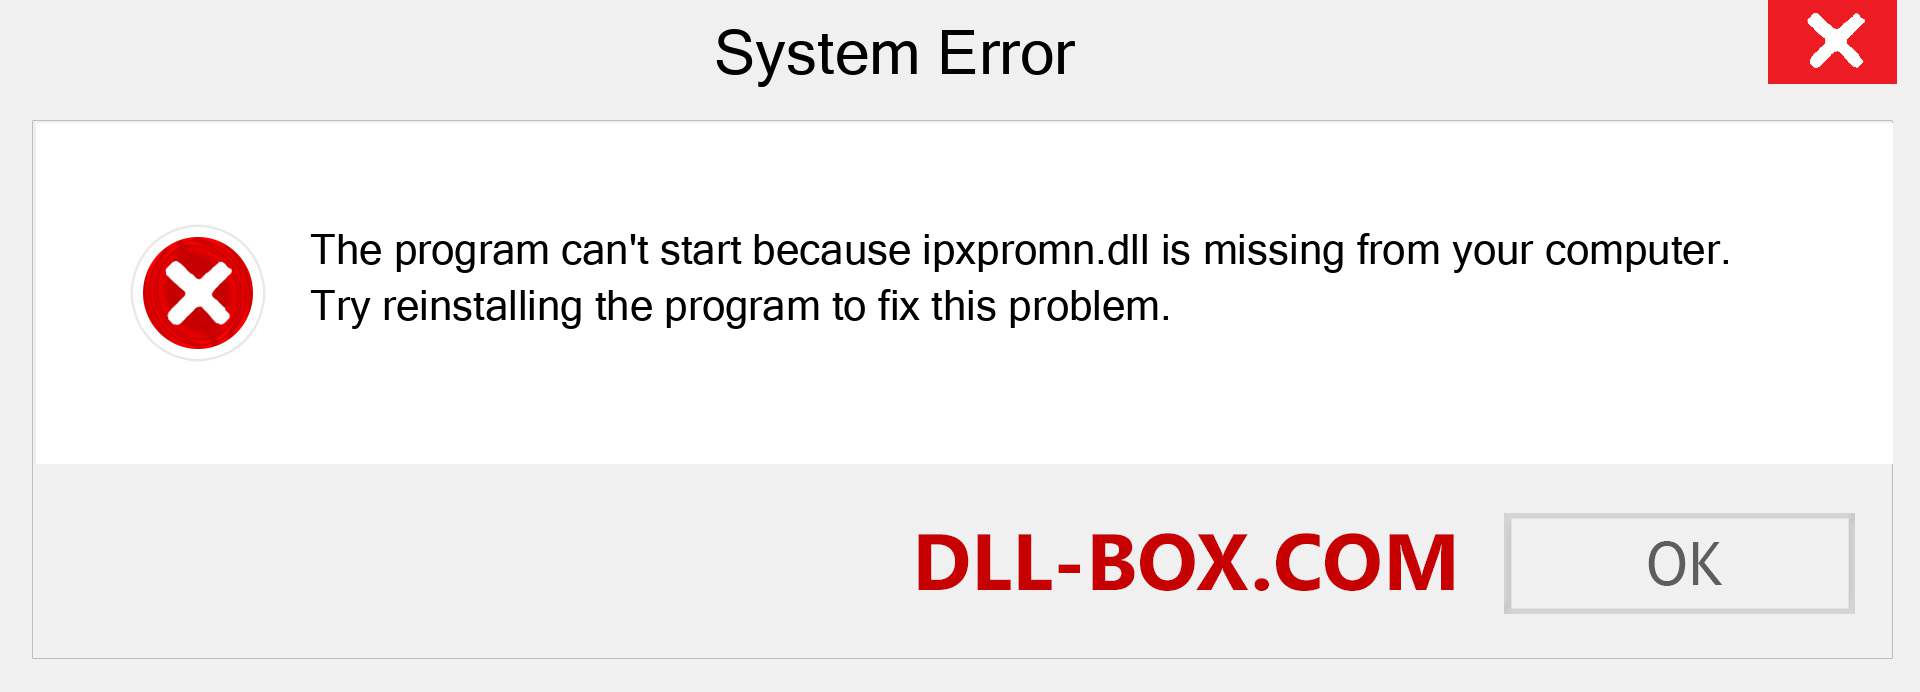  ipxpromn.dll file is missing?. Download for Windows 7, 8, 10 - Fix  ipxpromn dll Missing Error on Windows, photos, images